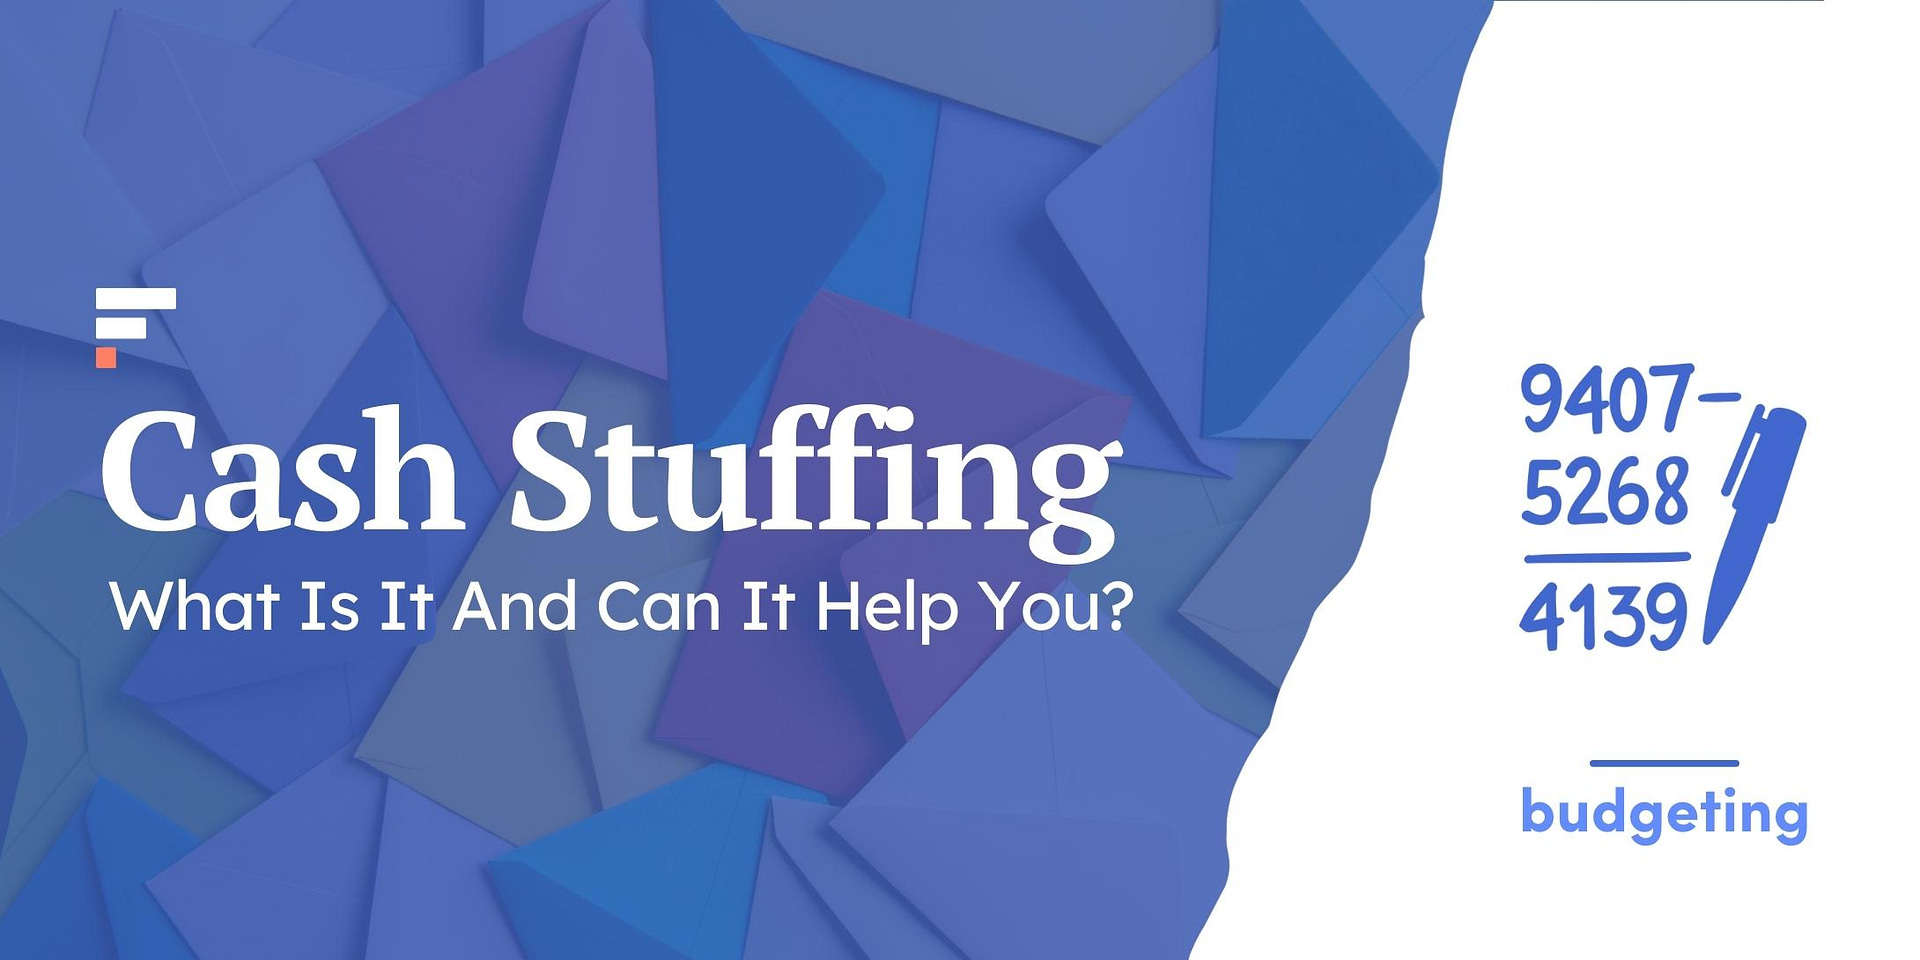 What is 'cash stuffing' and how does it work?